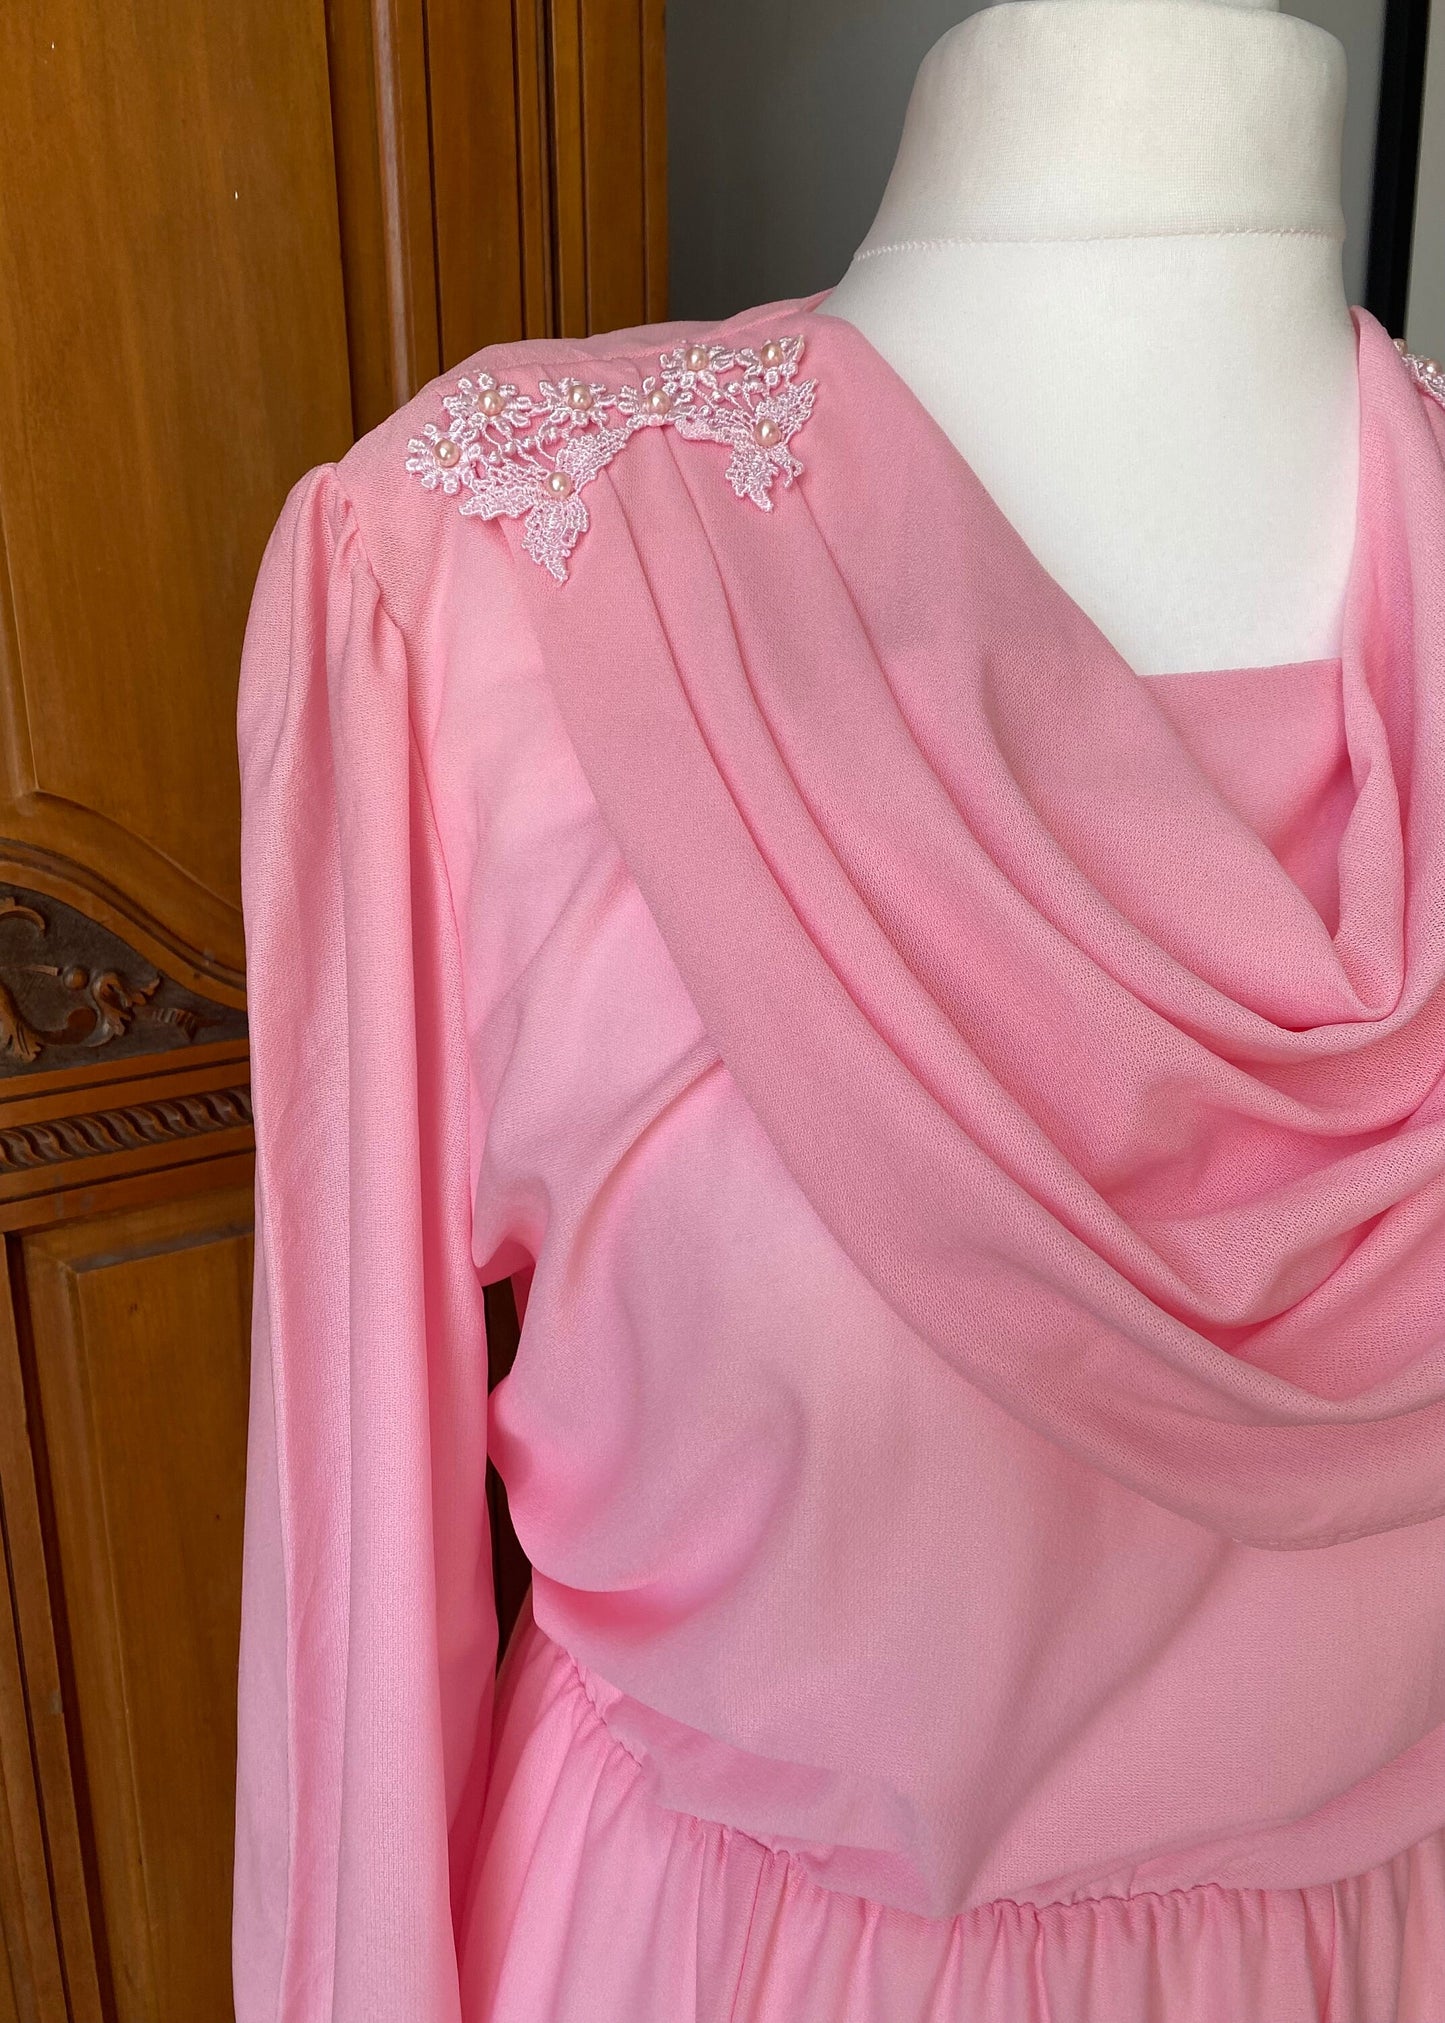 70s/80s pink maxi dress with draped neck line. Approx UK size 16